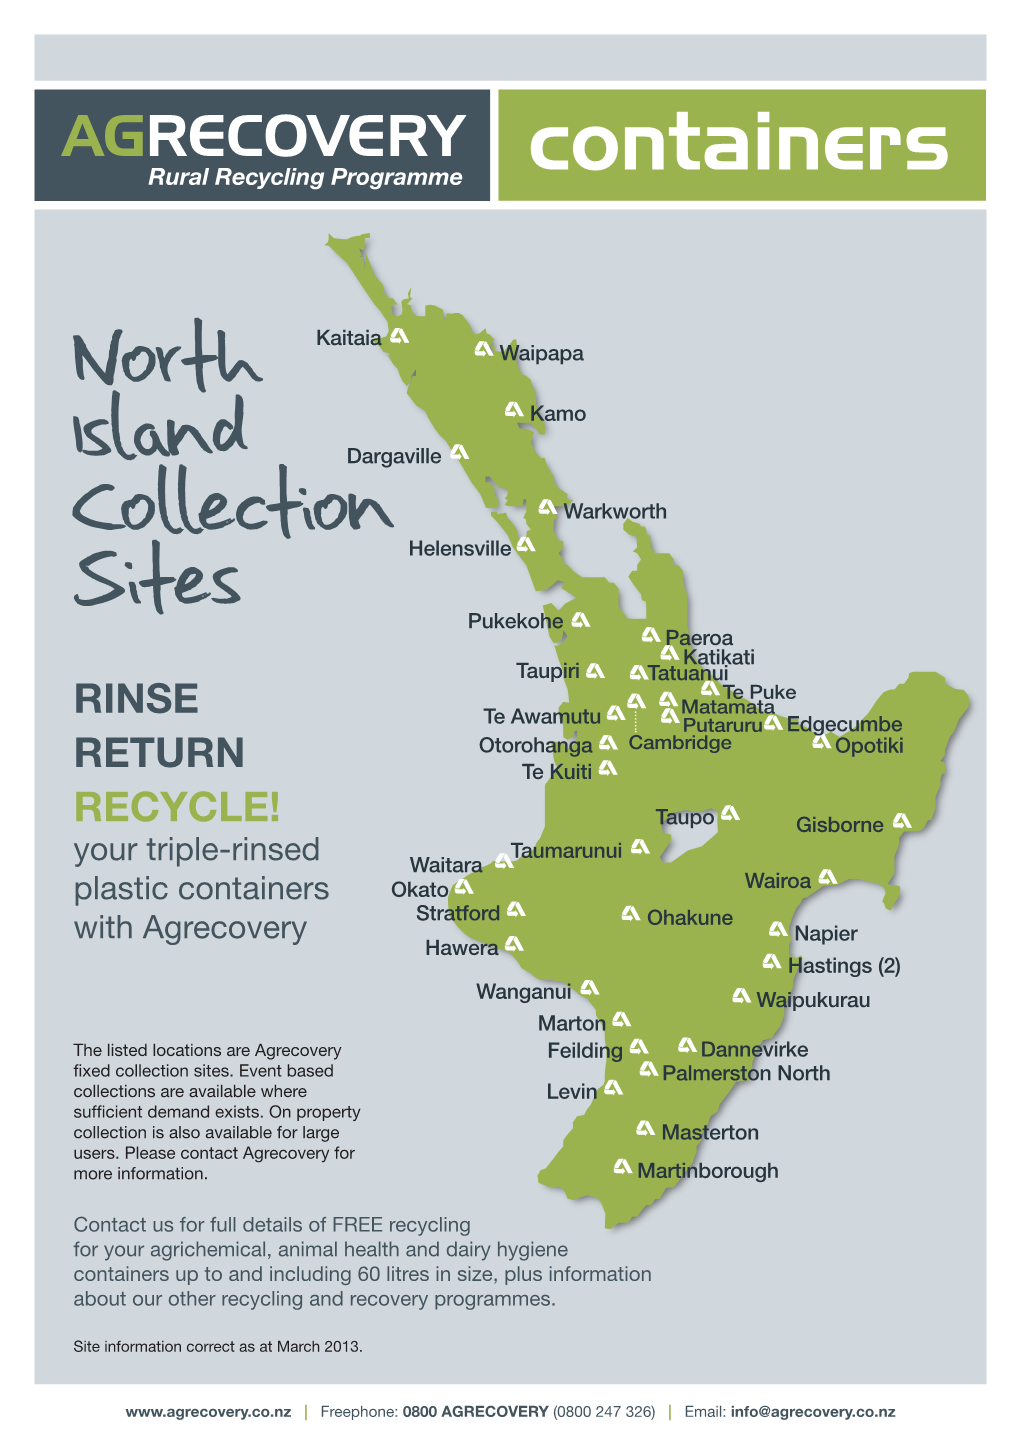 North Island Collection Sites Address Opening Hours